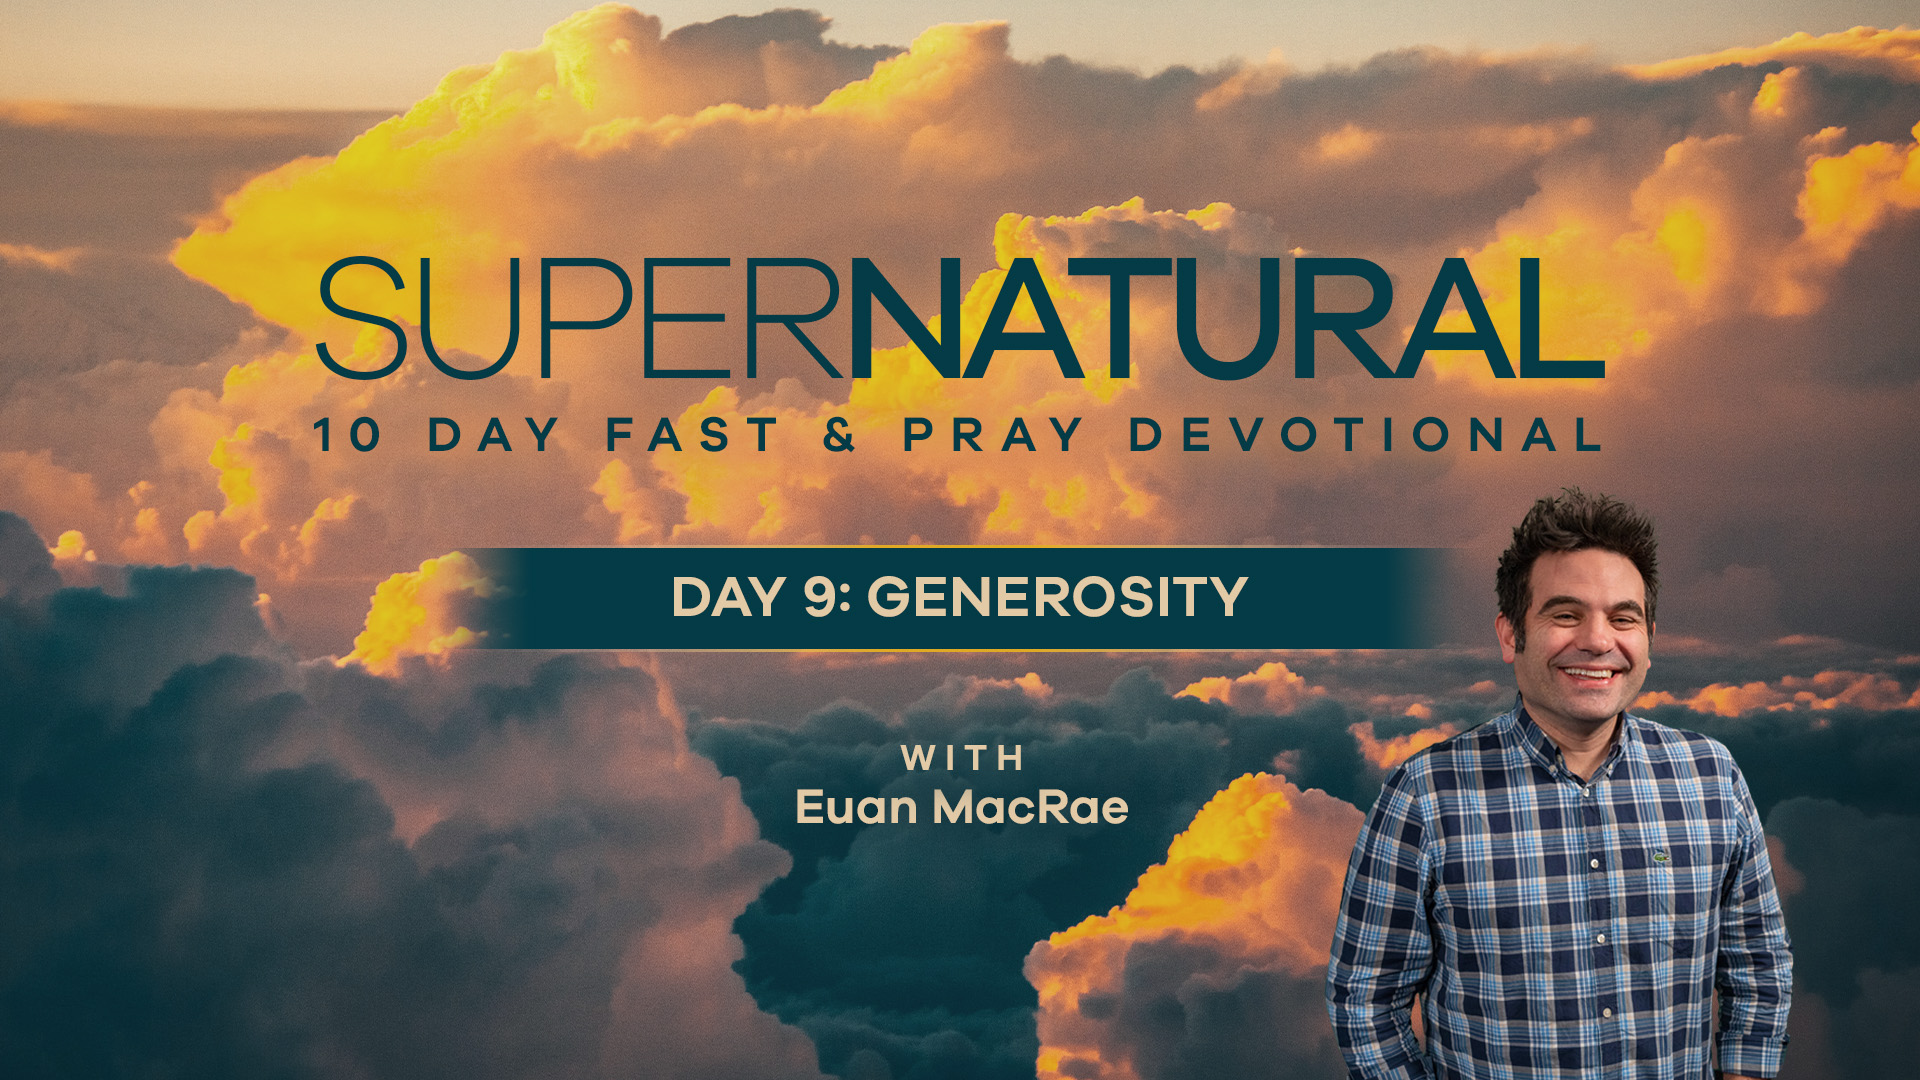 Video image for 'Day 9: Generosity'' of the 10-Day Supernatural Devotional about generosity.